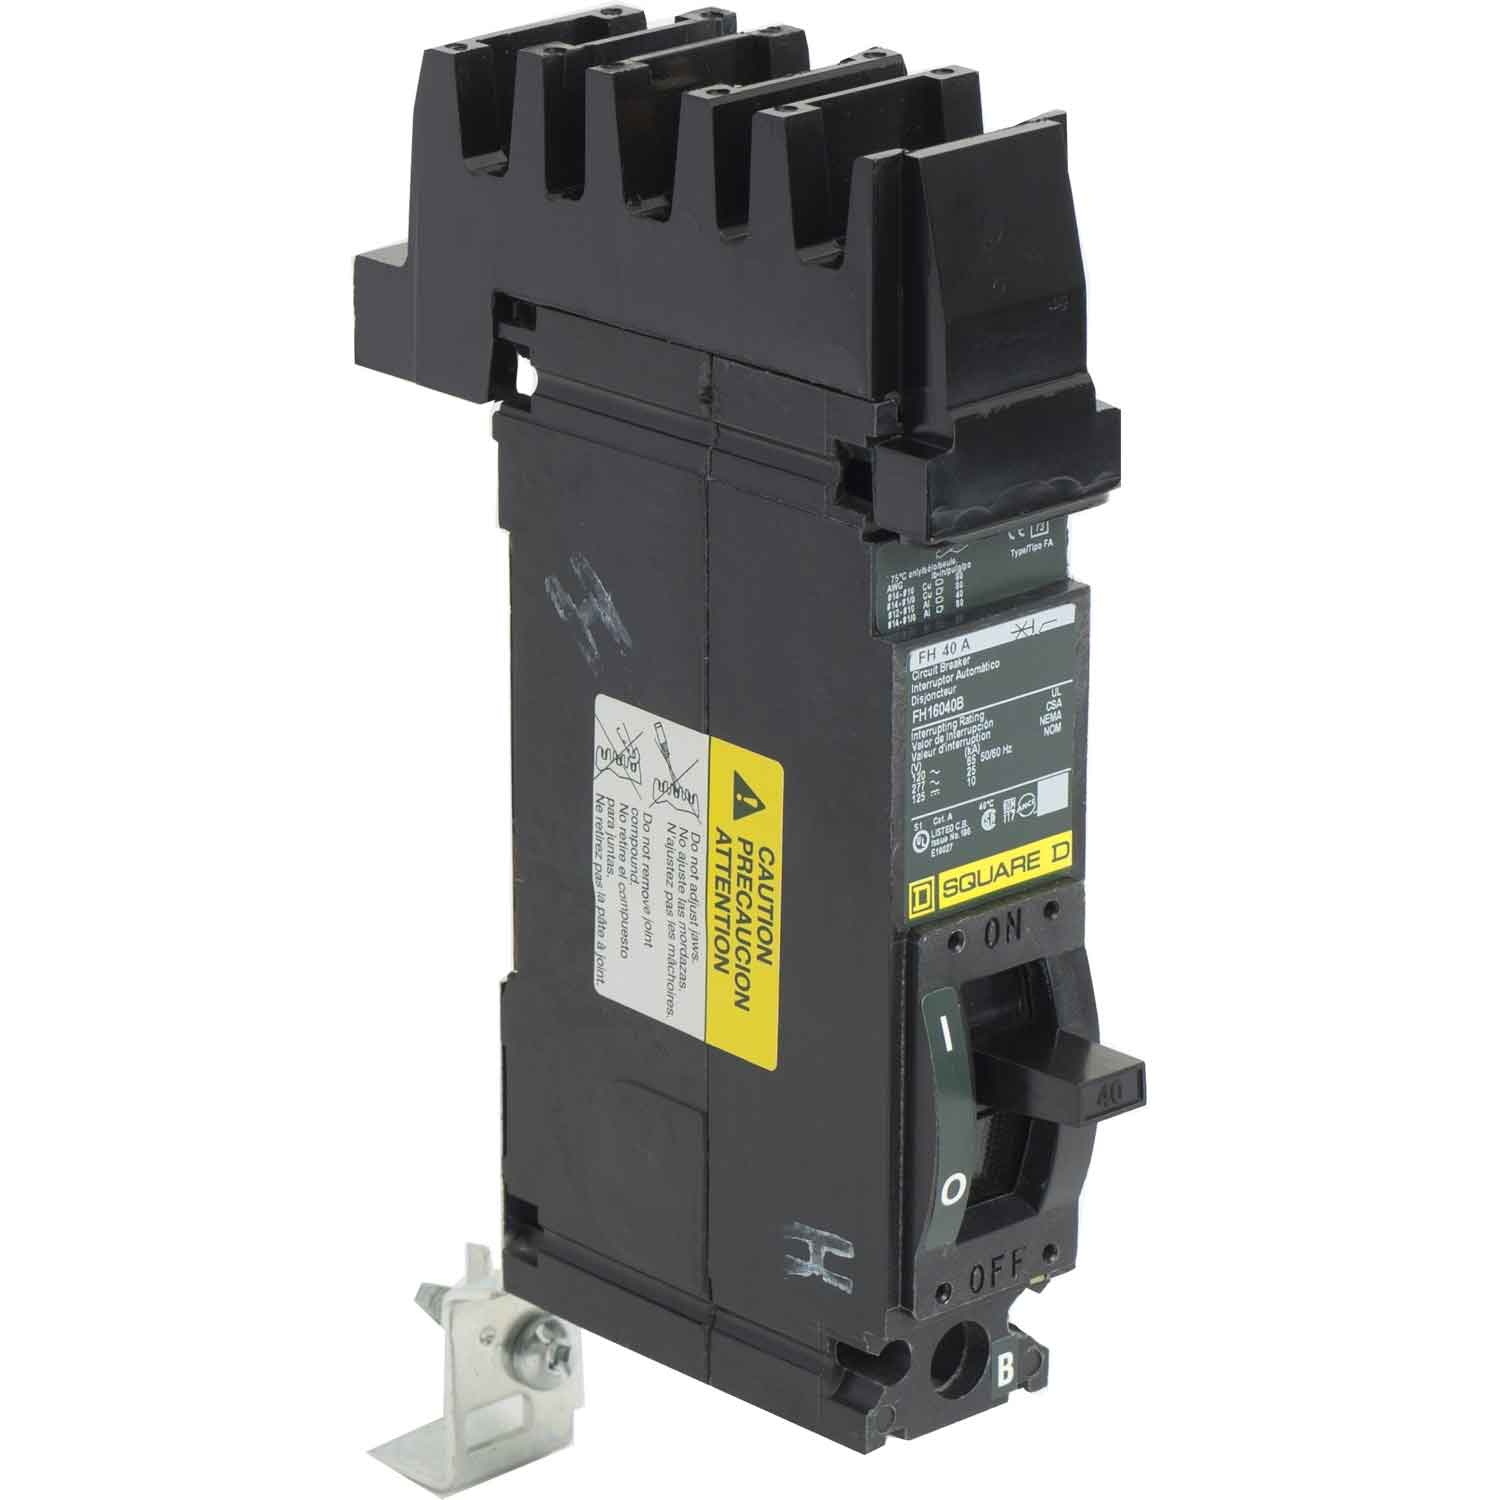 FH16040B - Square D - Molded Case Circuit Breakers